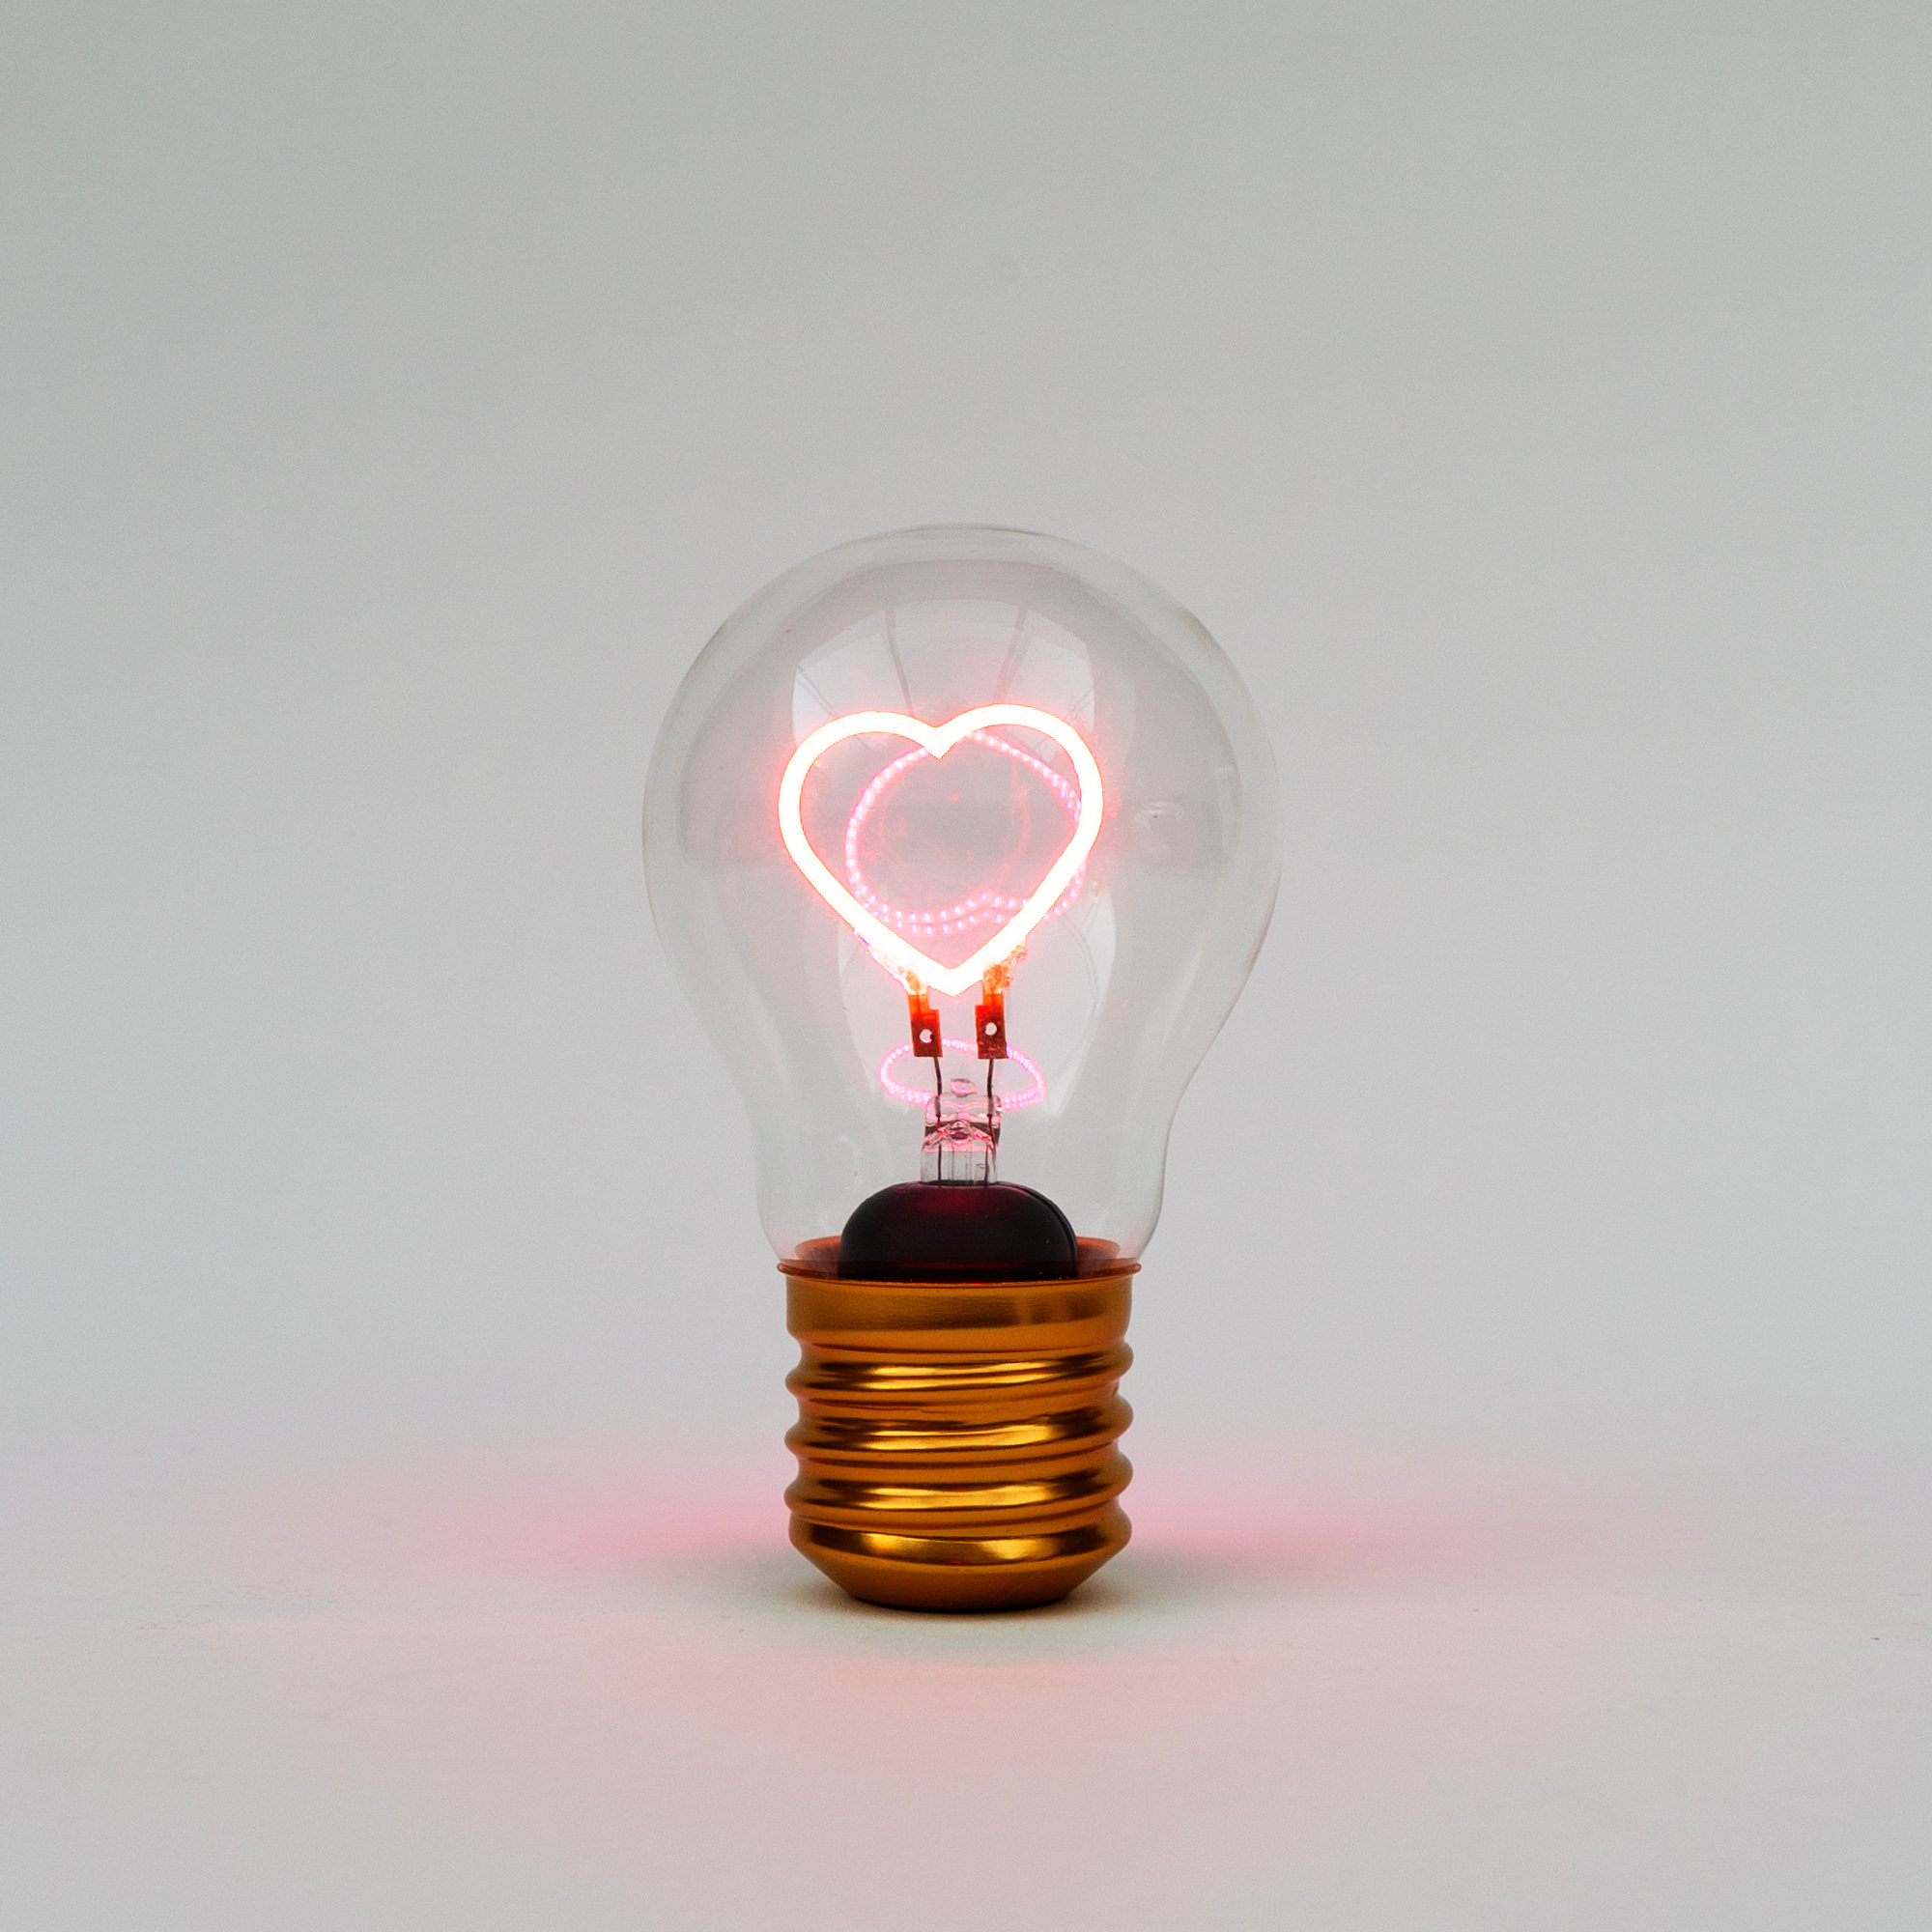 Cordless, Metal and Glass Lightbulb with heart